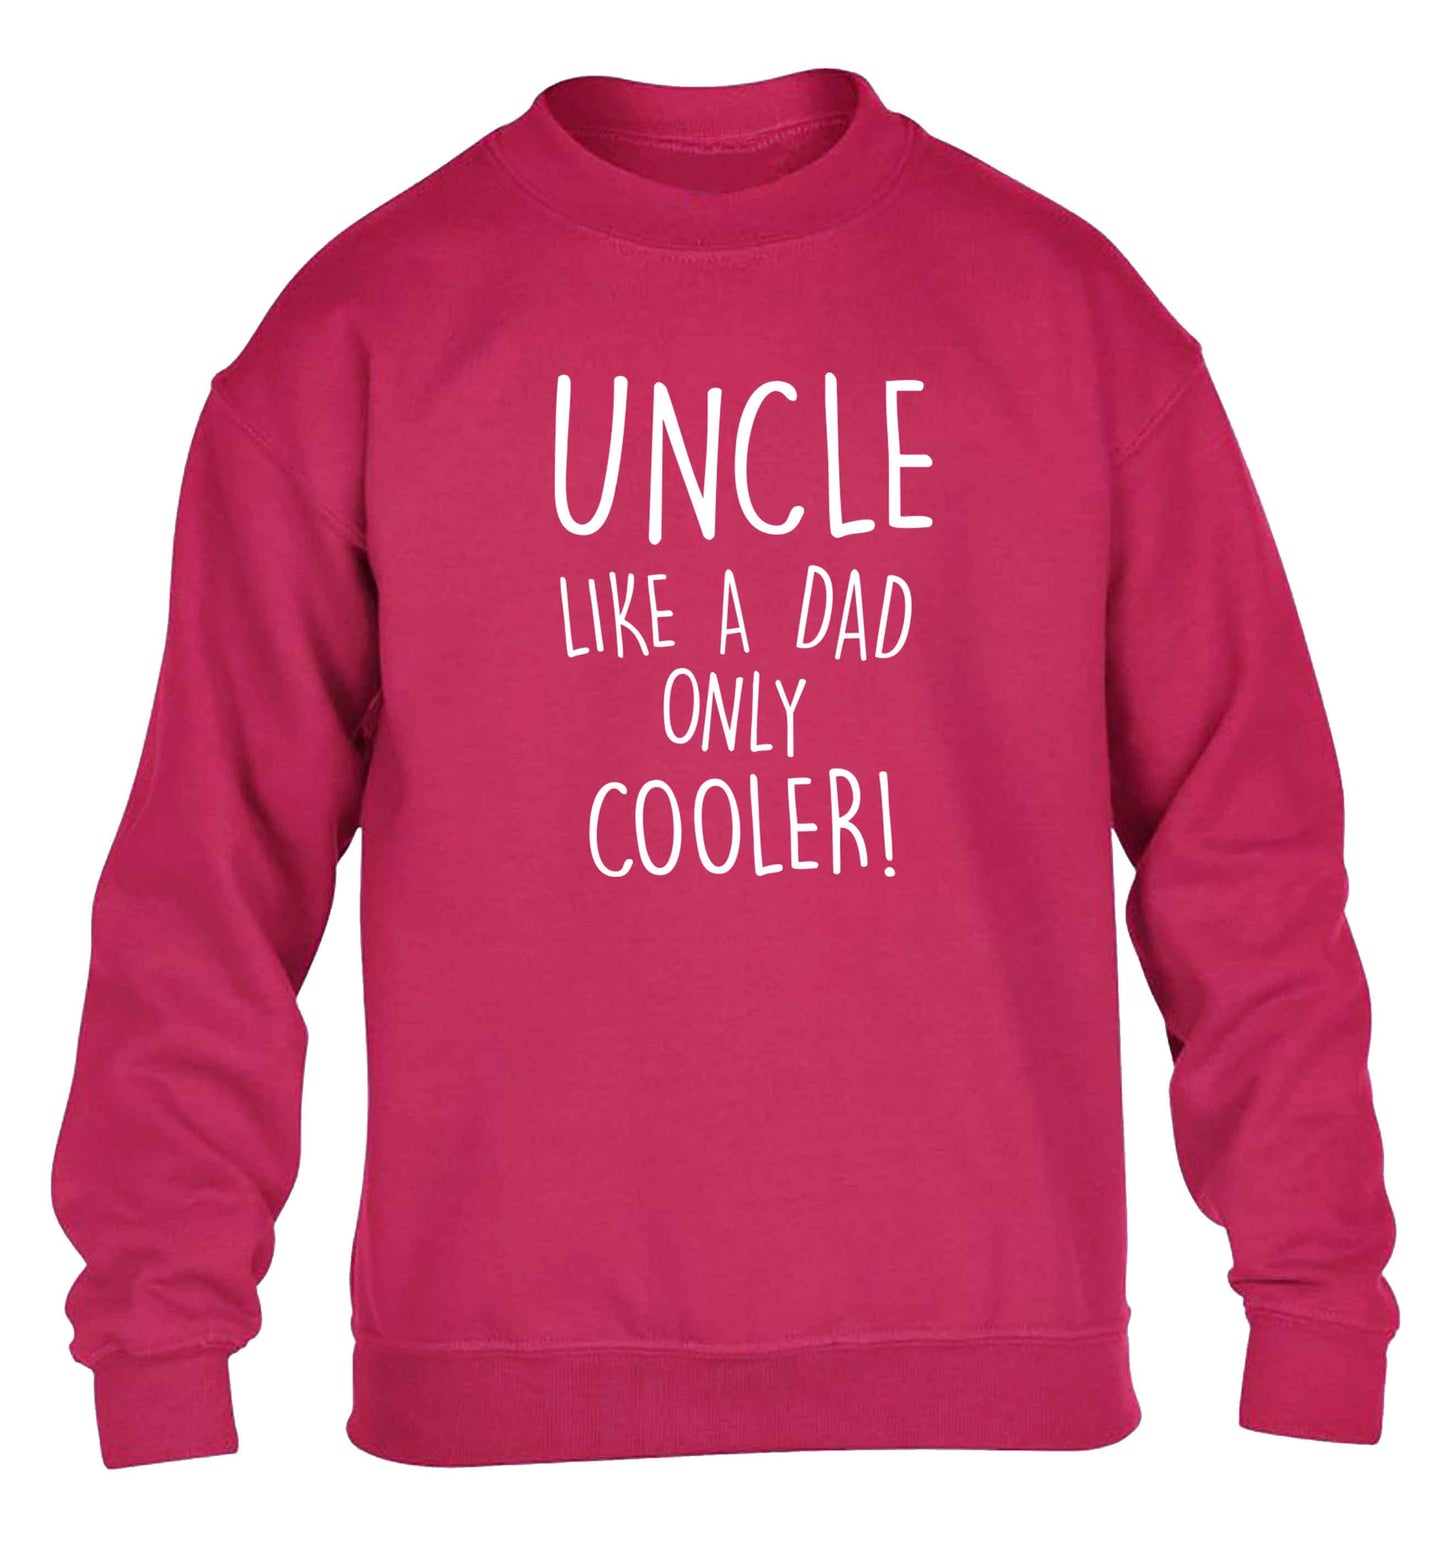 Uncle like a dad only cooler children's pink sweater 12-13 Years